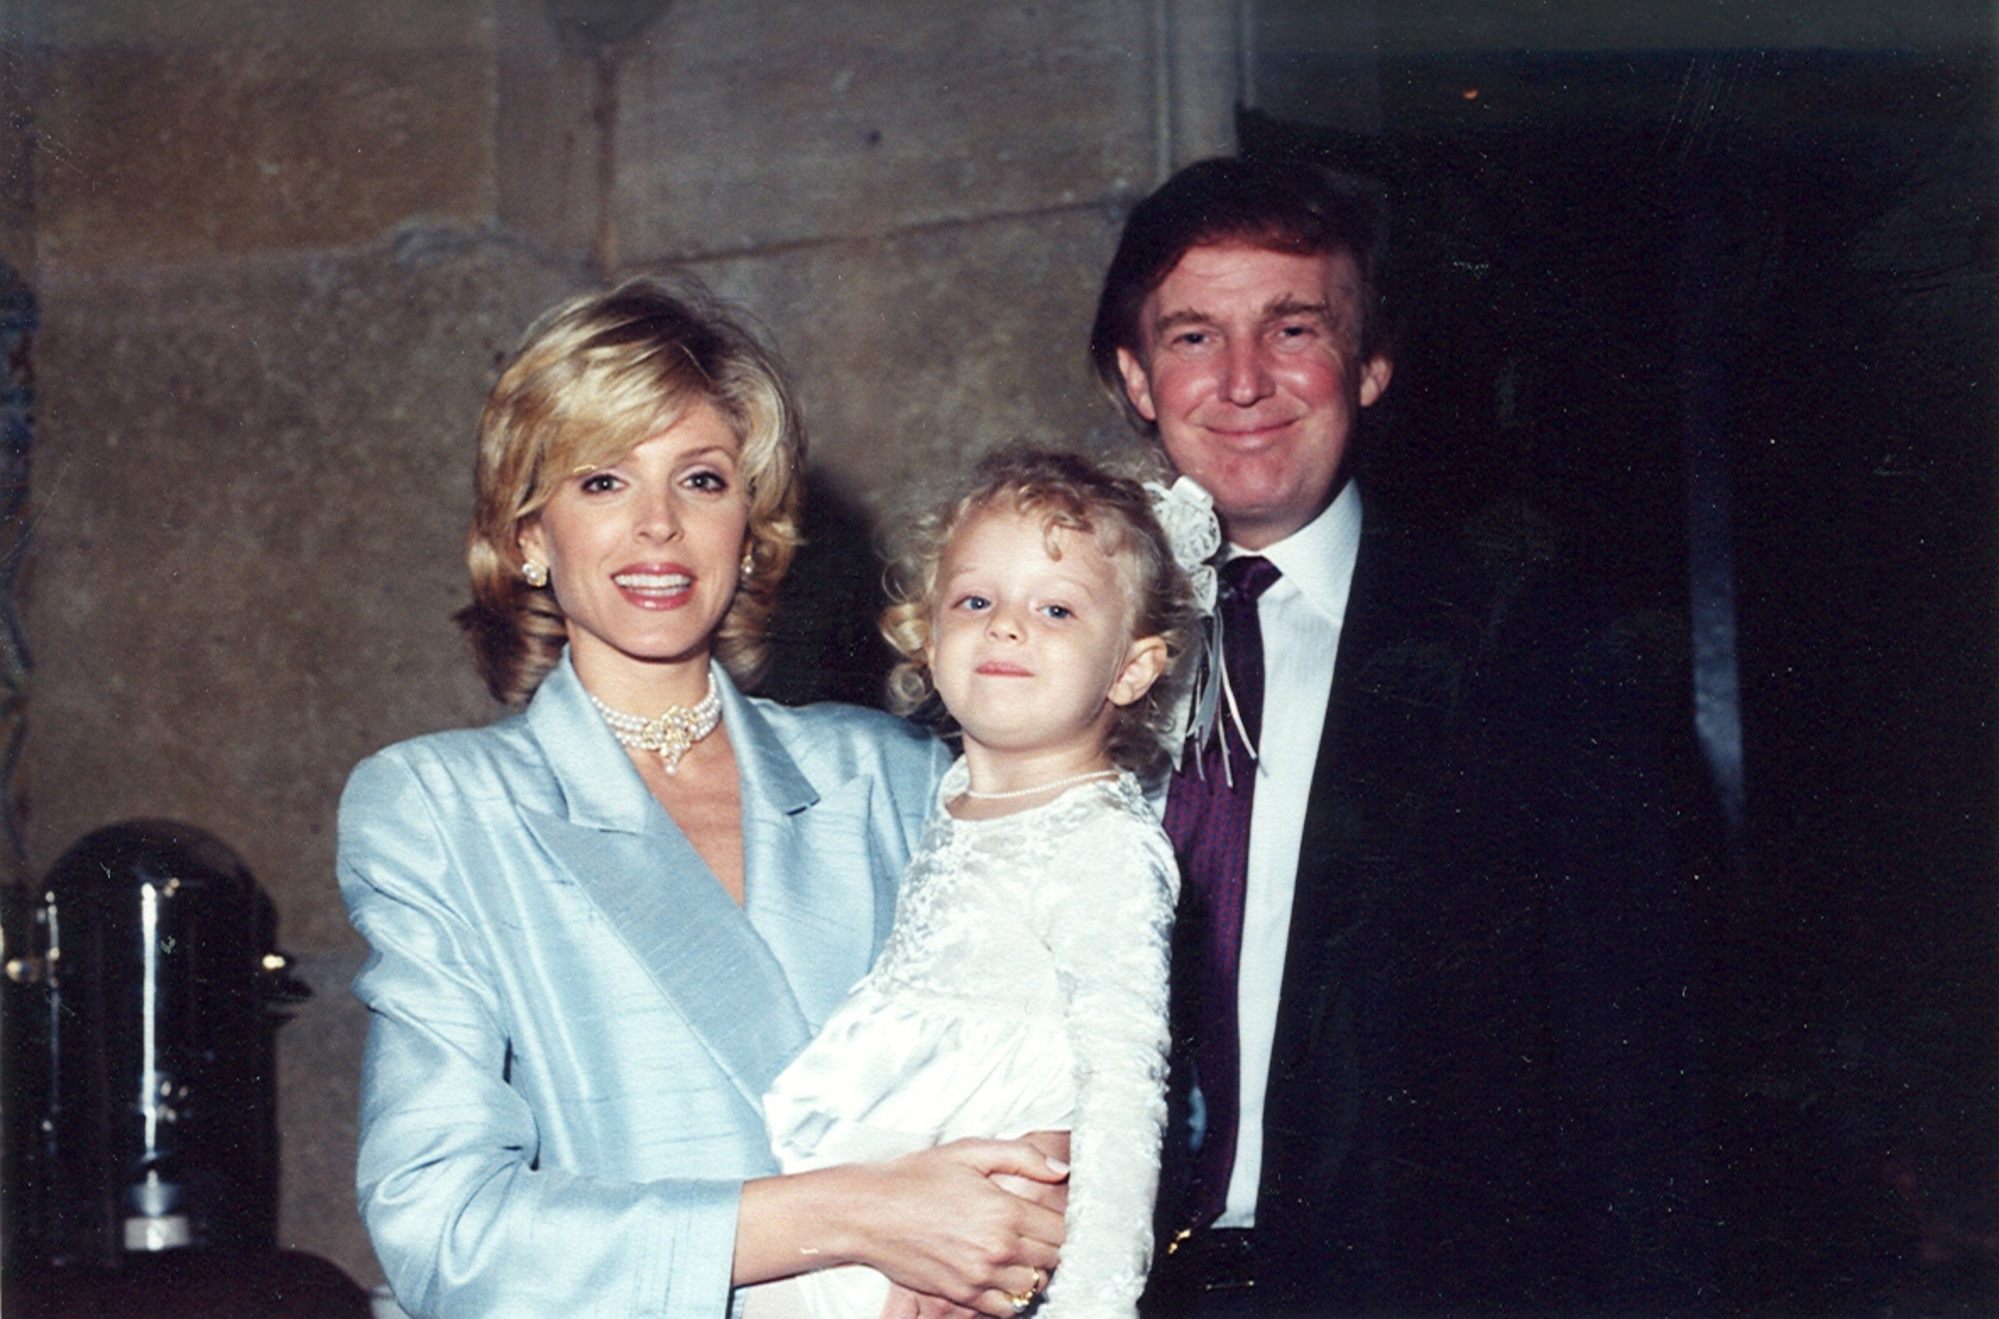 Marla Maples and her then husband, businessman Donald Trump, with their daughter Tiffany, as they pose together at the Mar-a-Lago estate, Palm Beach, Florida, in 1996. Photo: Getty Images